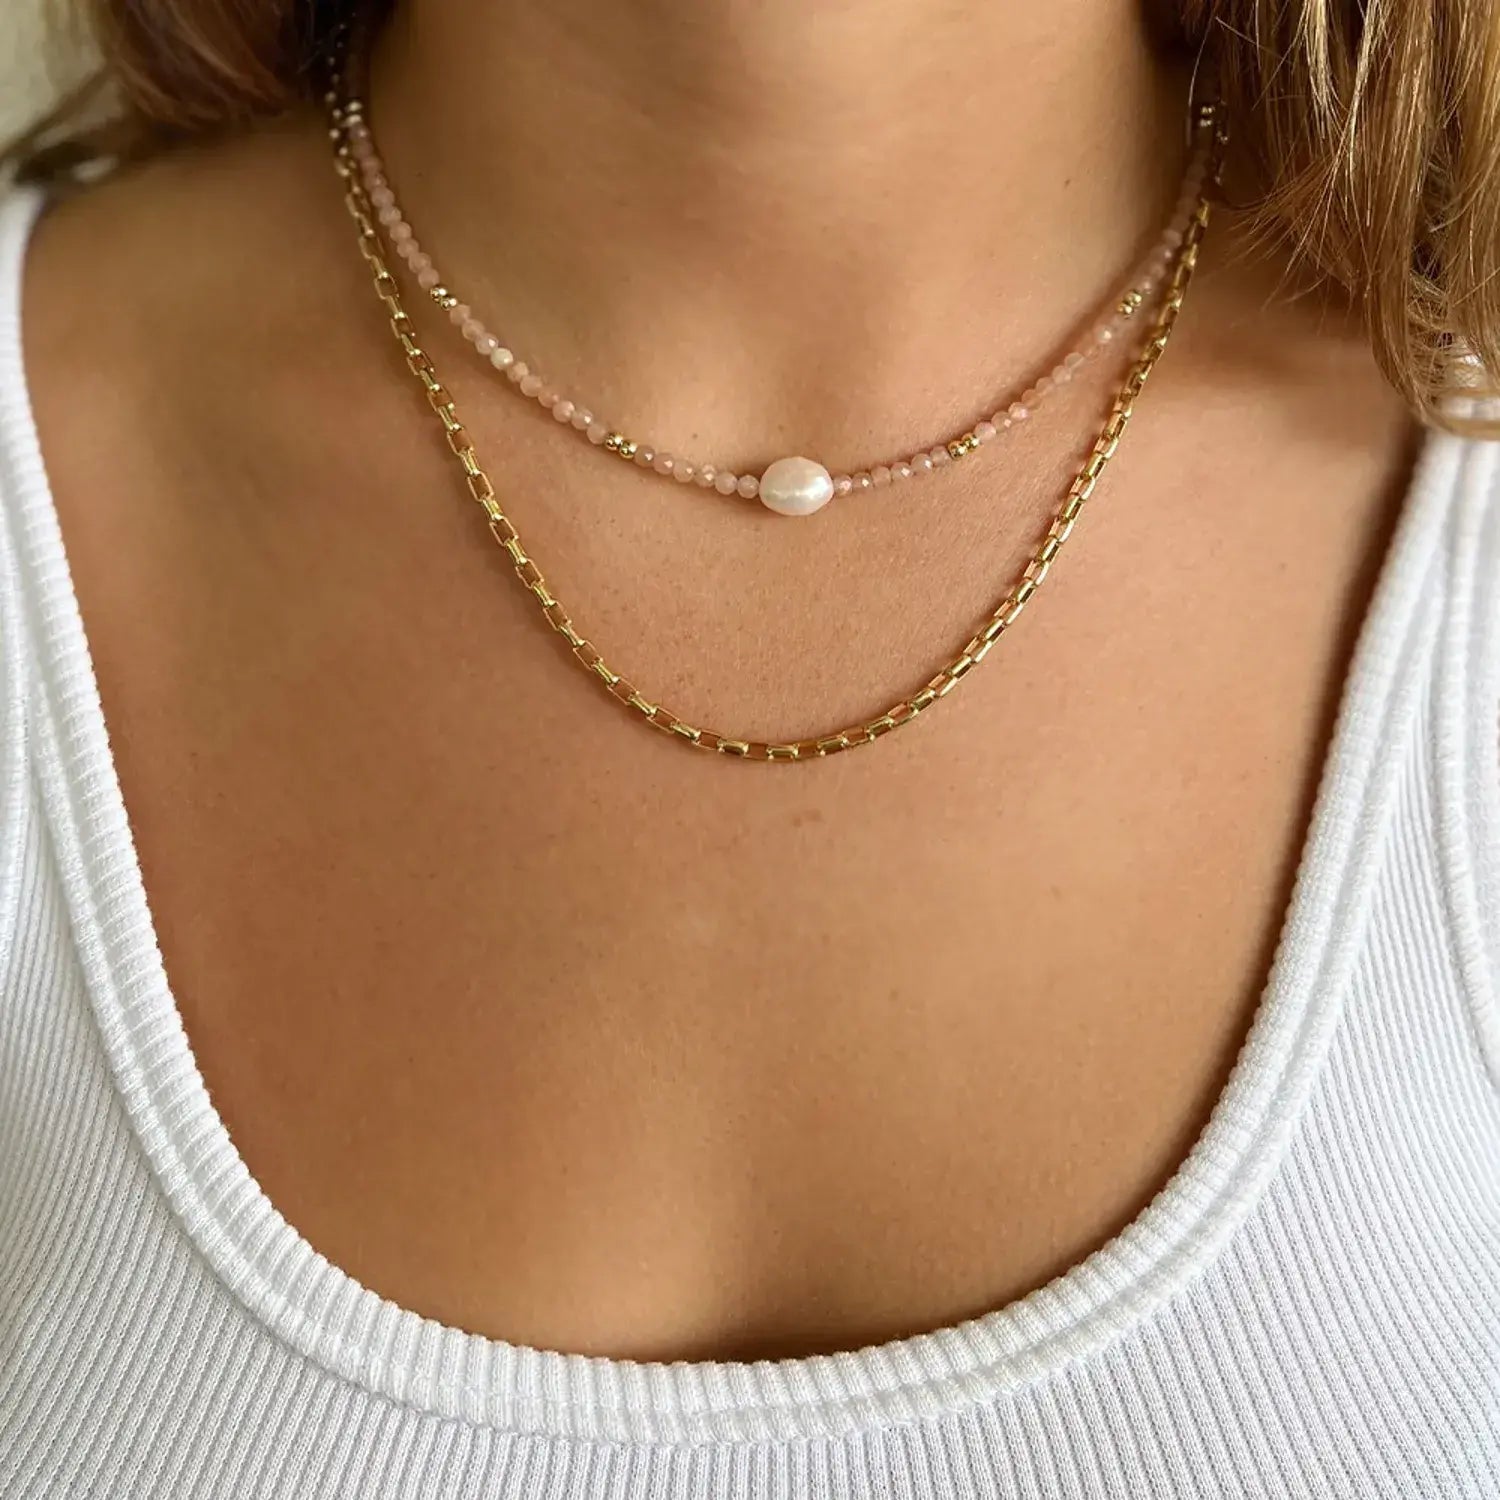 Mila Gemstone and Pearl Choker by Arms of Eve 